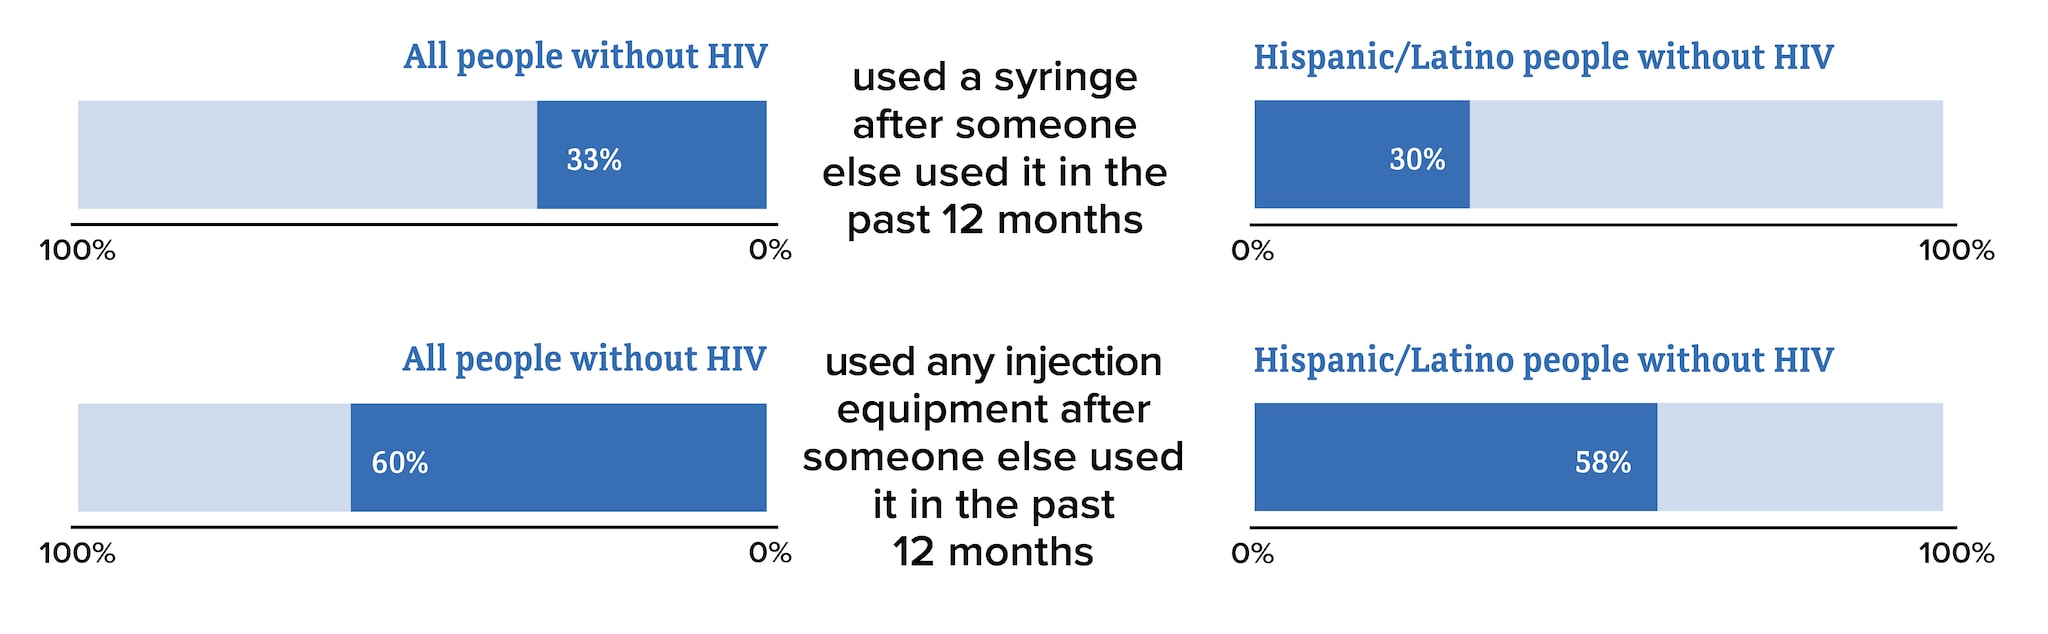 This chart shows 30 percent of Hispanic/Latino people without HIV used a syringe after someone else used it and 58 percent used any injection equipment after someone else used it.